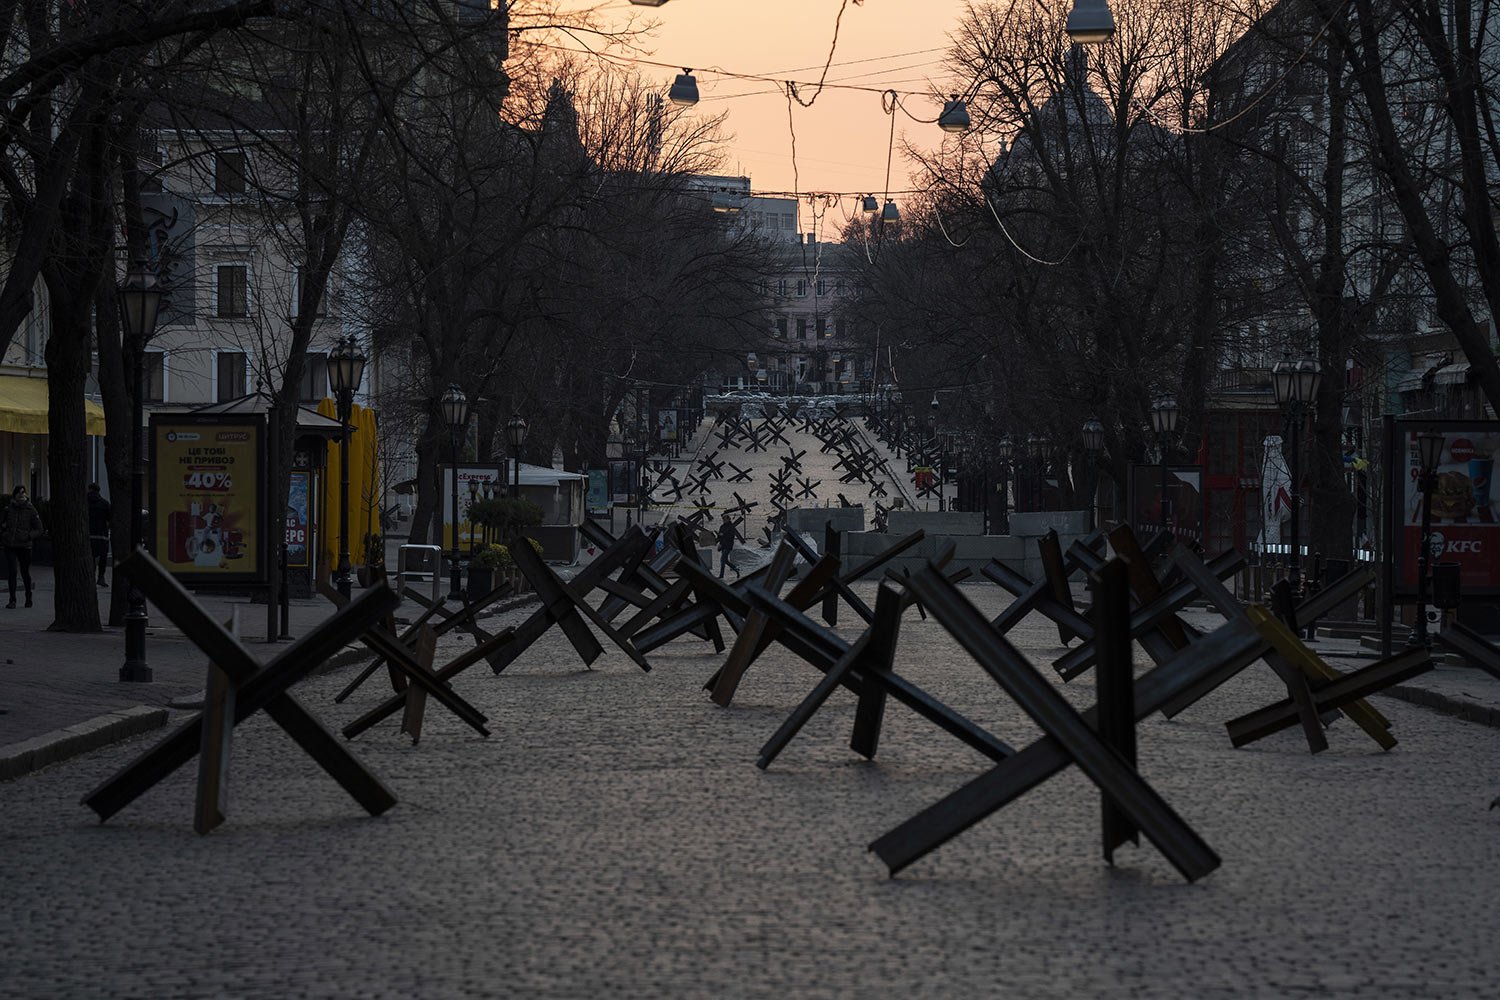  Anti-tank barricades block a street placed in preparation for a possible Russian offensive in Odesa, Ukraine, March 24, 2022. (AP Photo/Petros Giannakouris, File) 